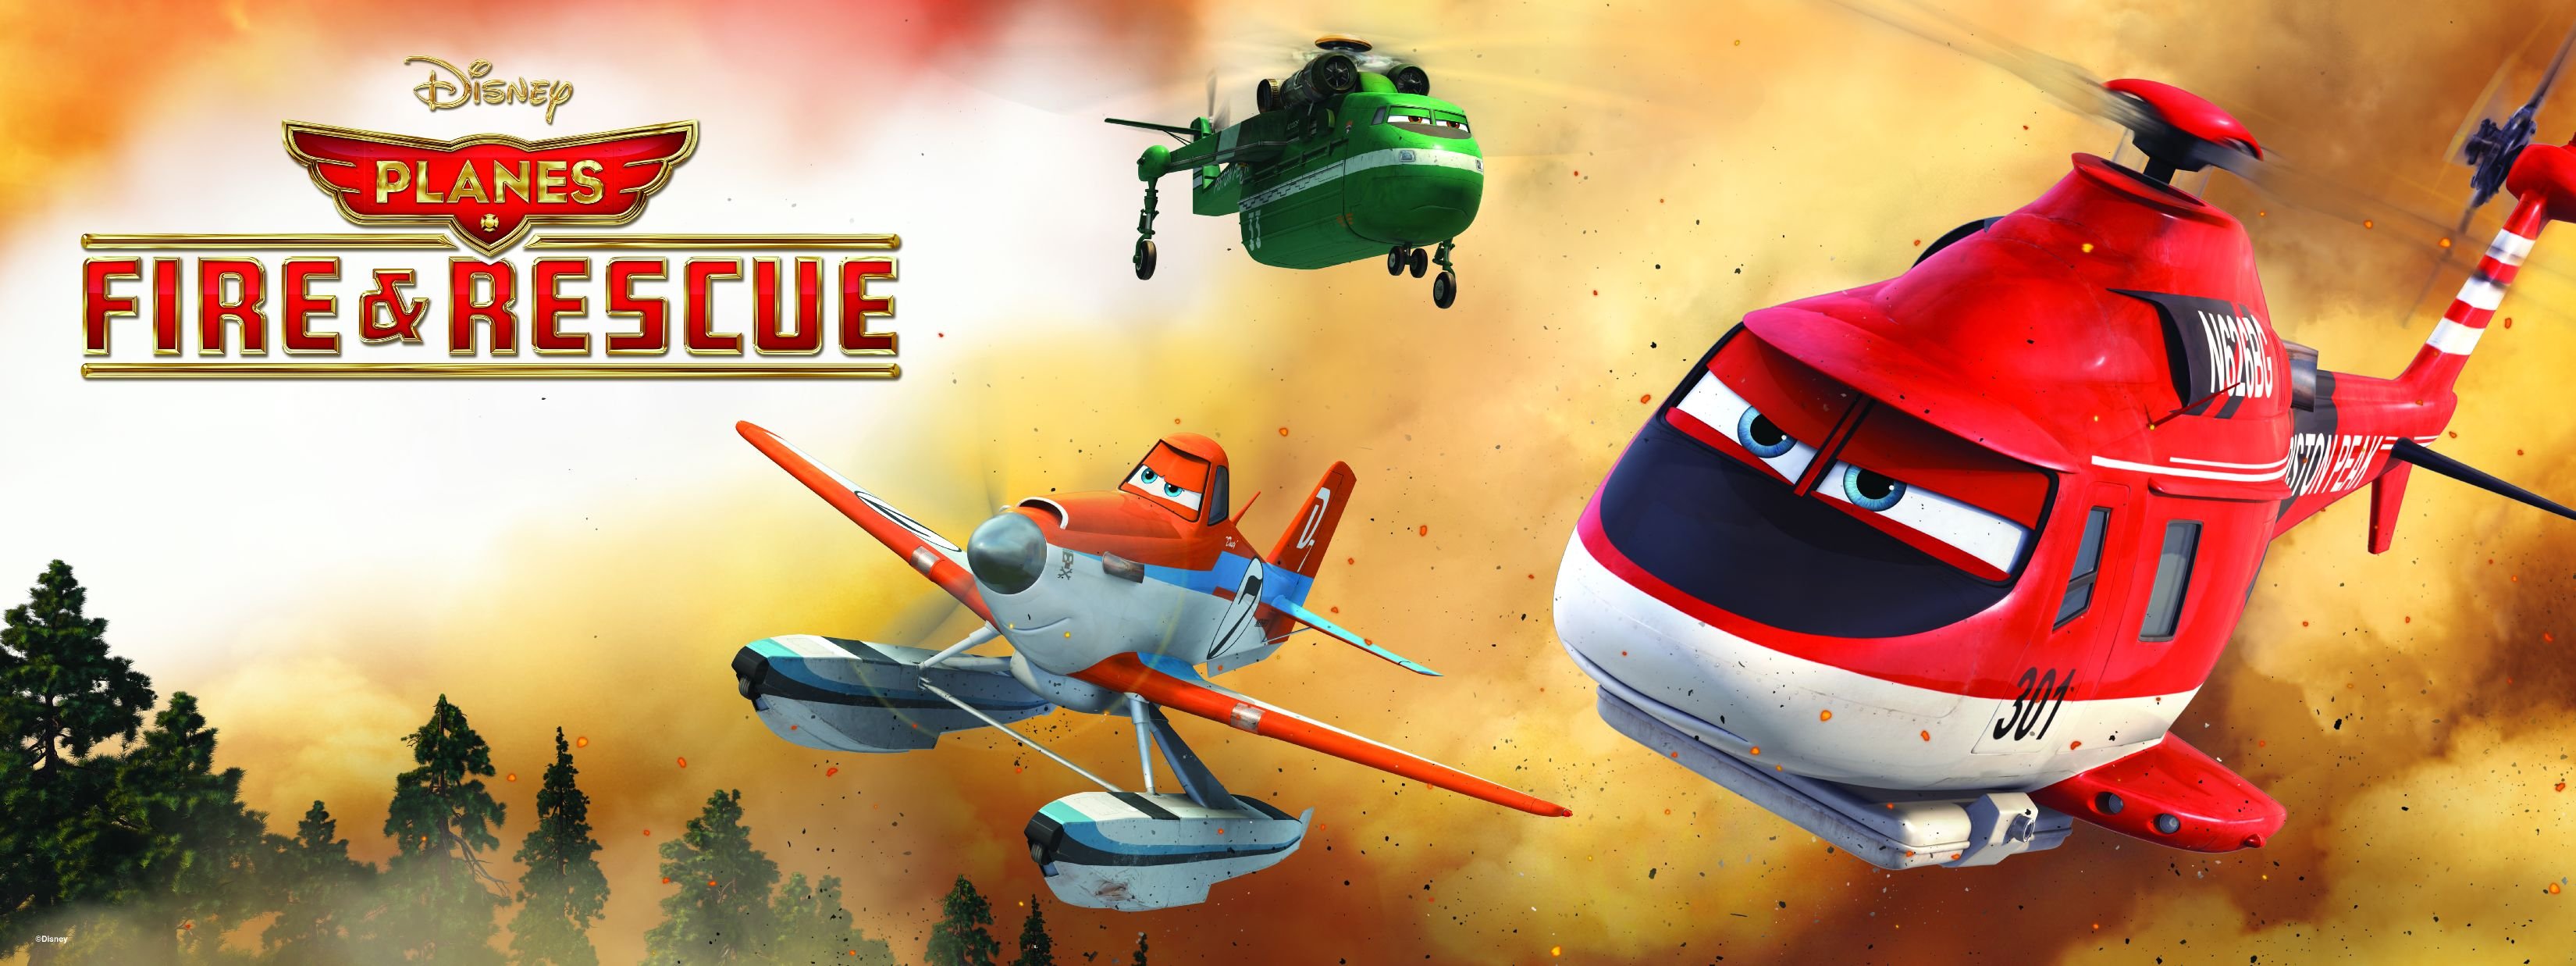 Planes fire rescue animation aircraft airplane comedy family pfr disney emergency poster wallpapers hd desktop and mobile backgrounds